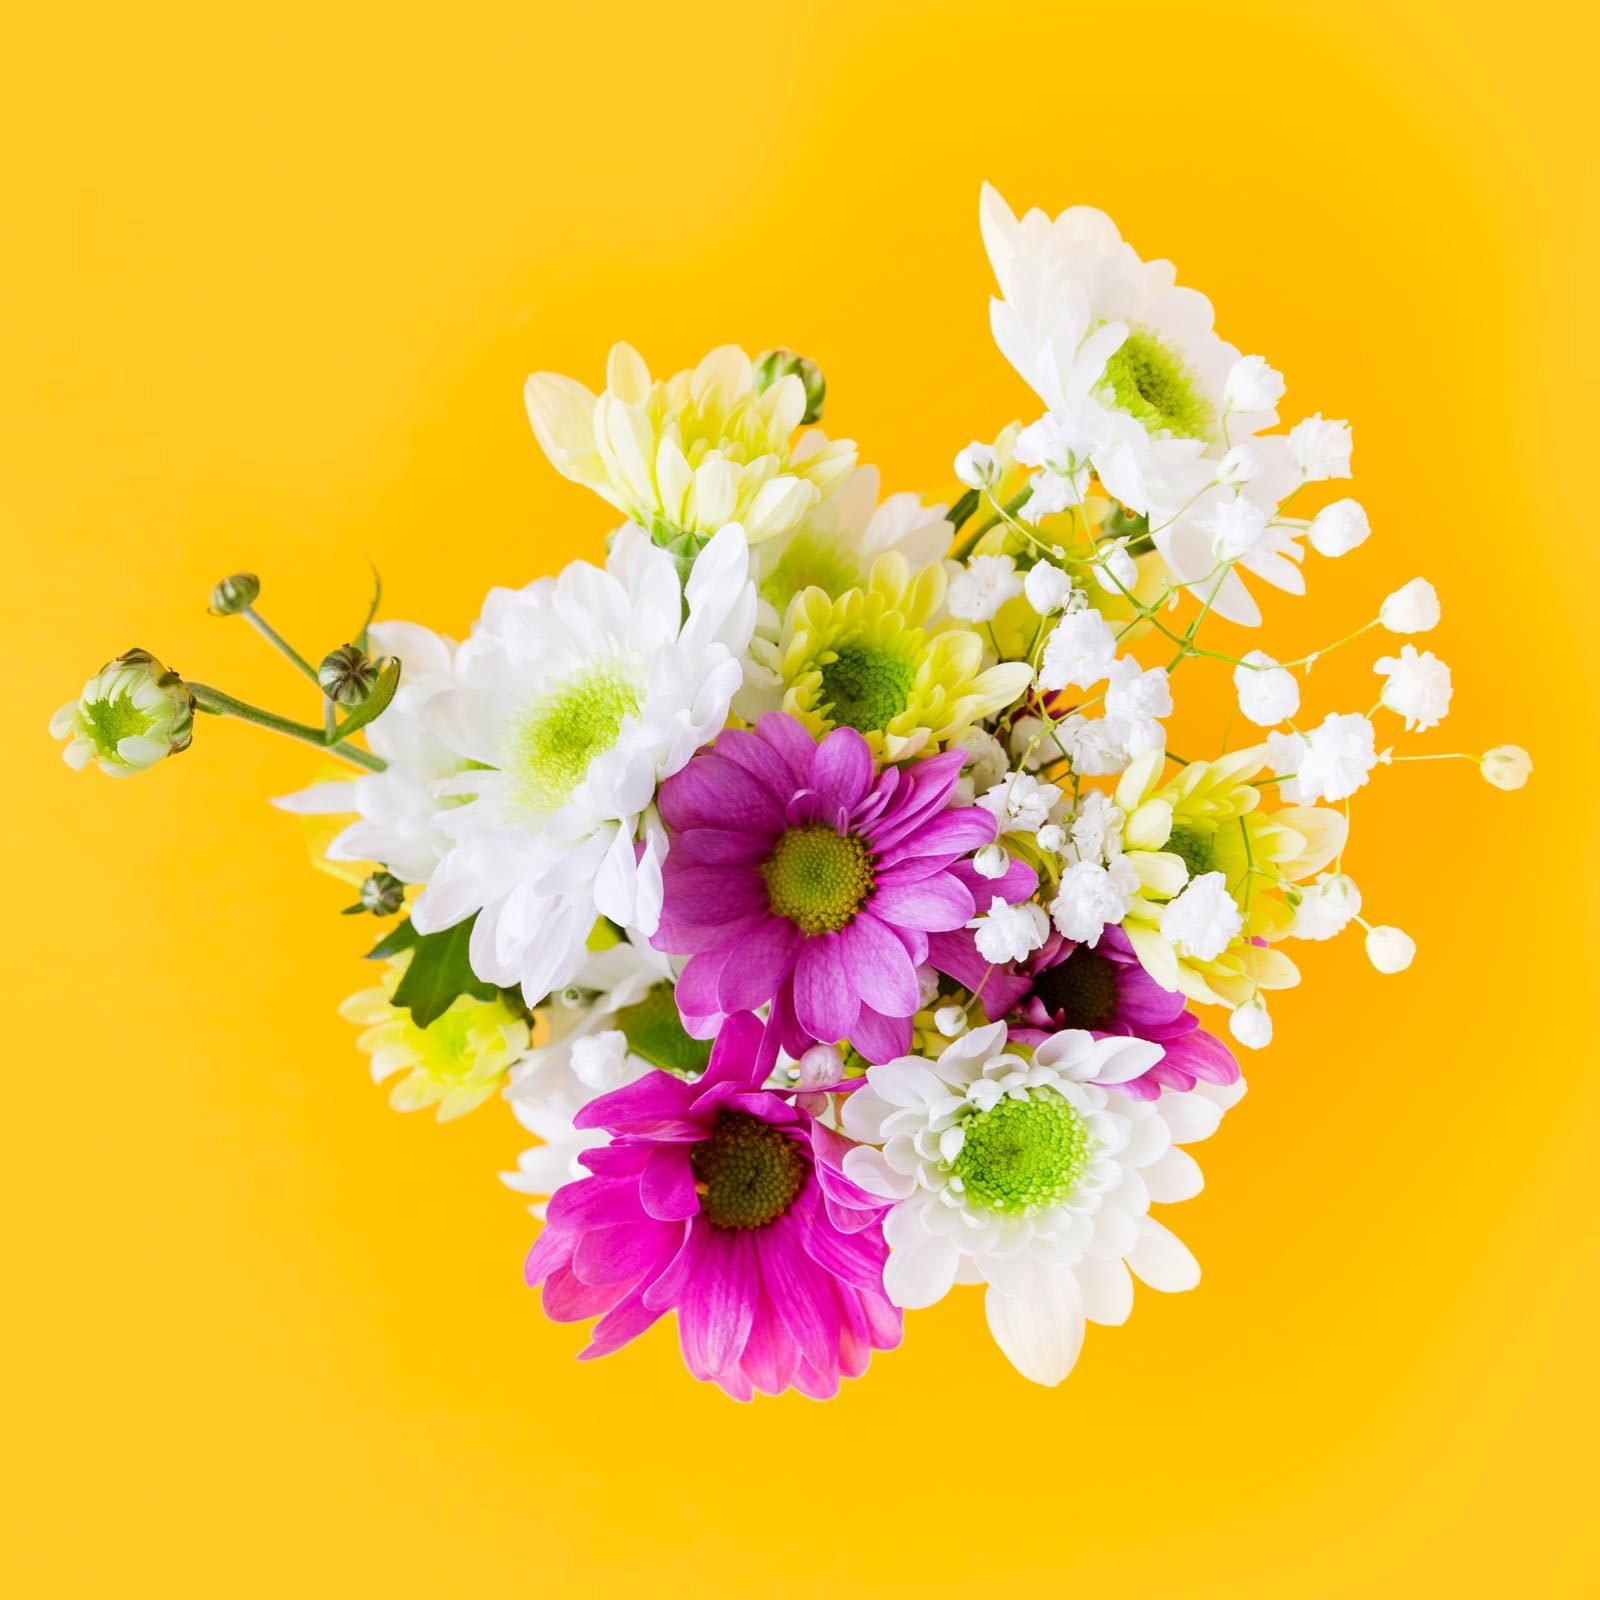 top view of a mixture of Cut Flowers on a yellow background